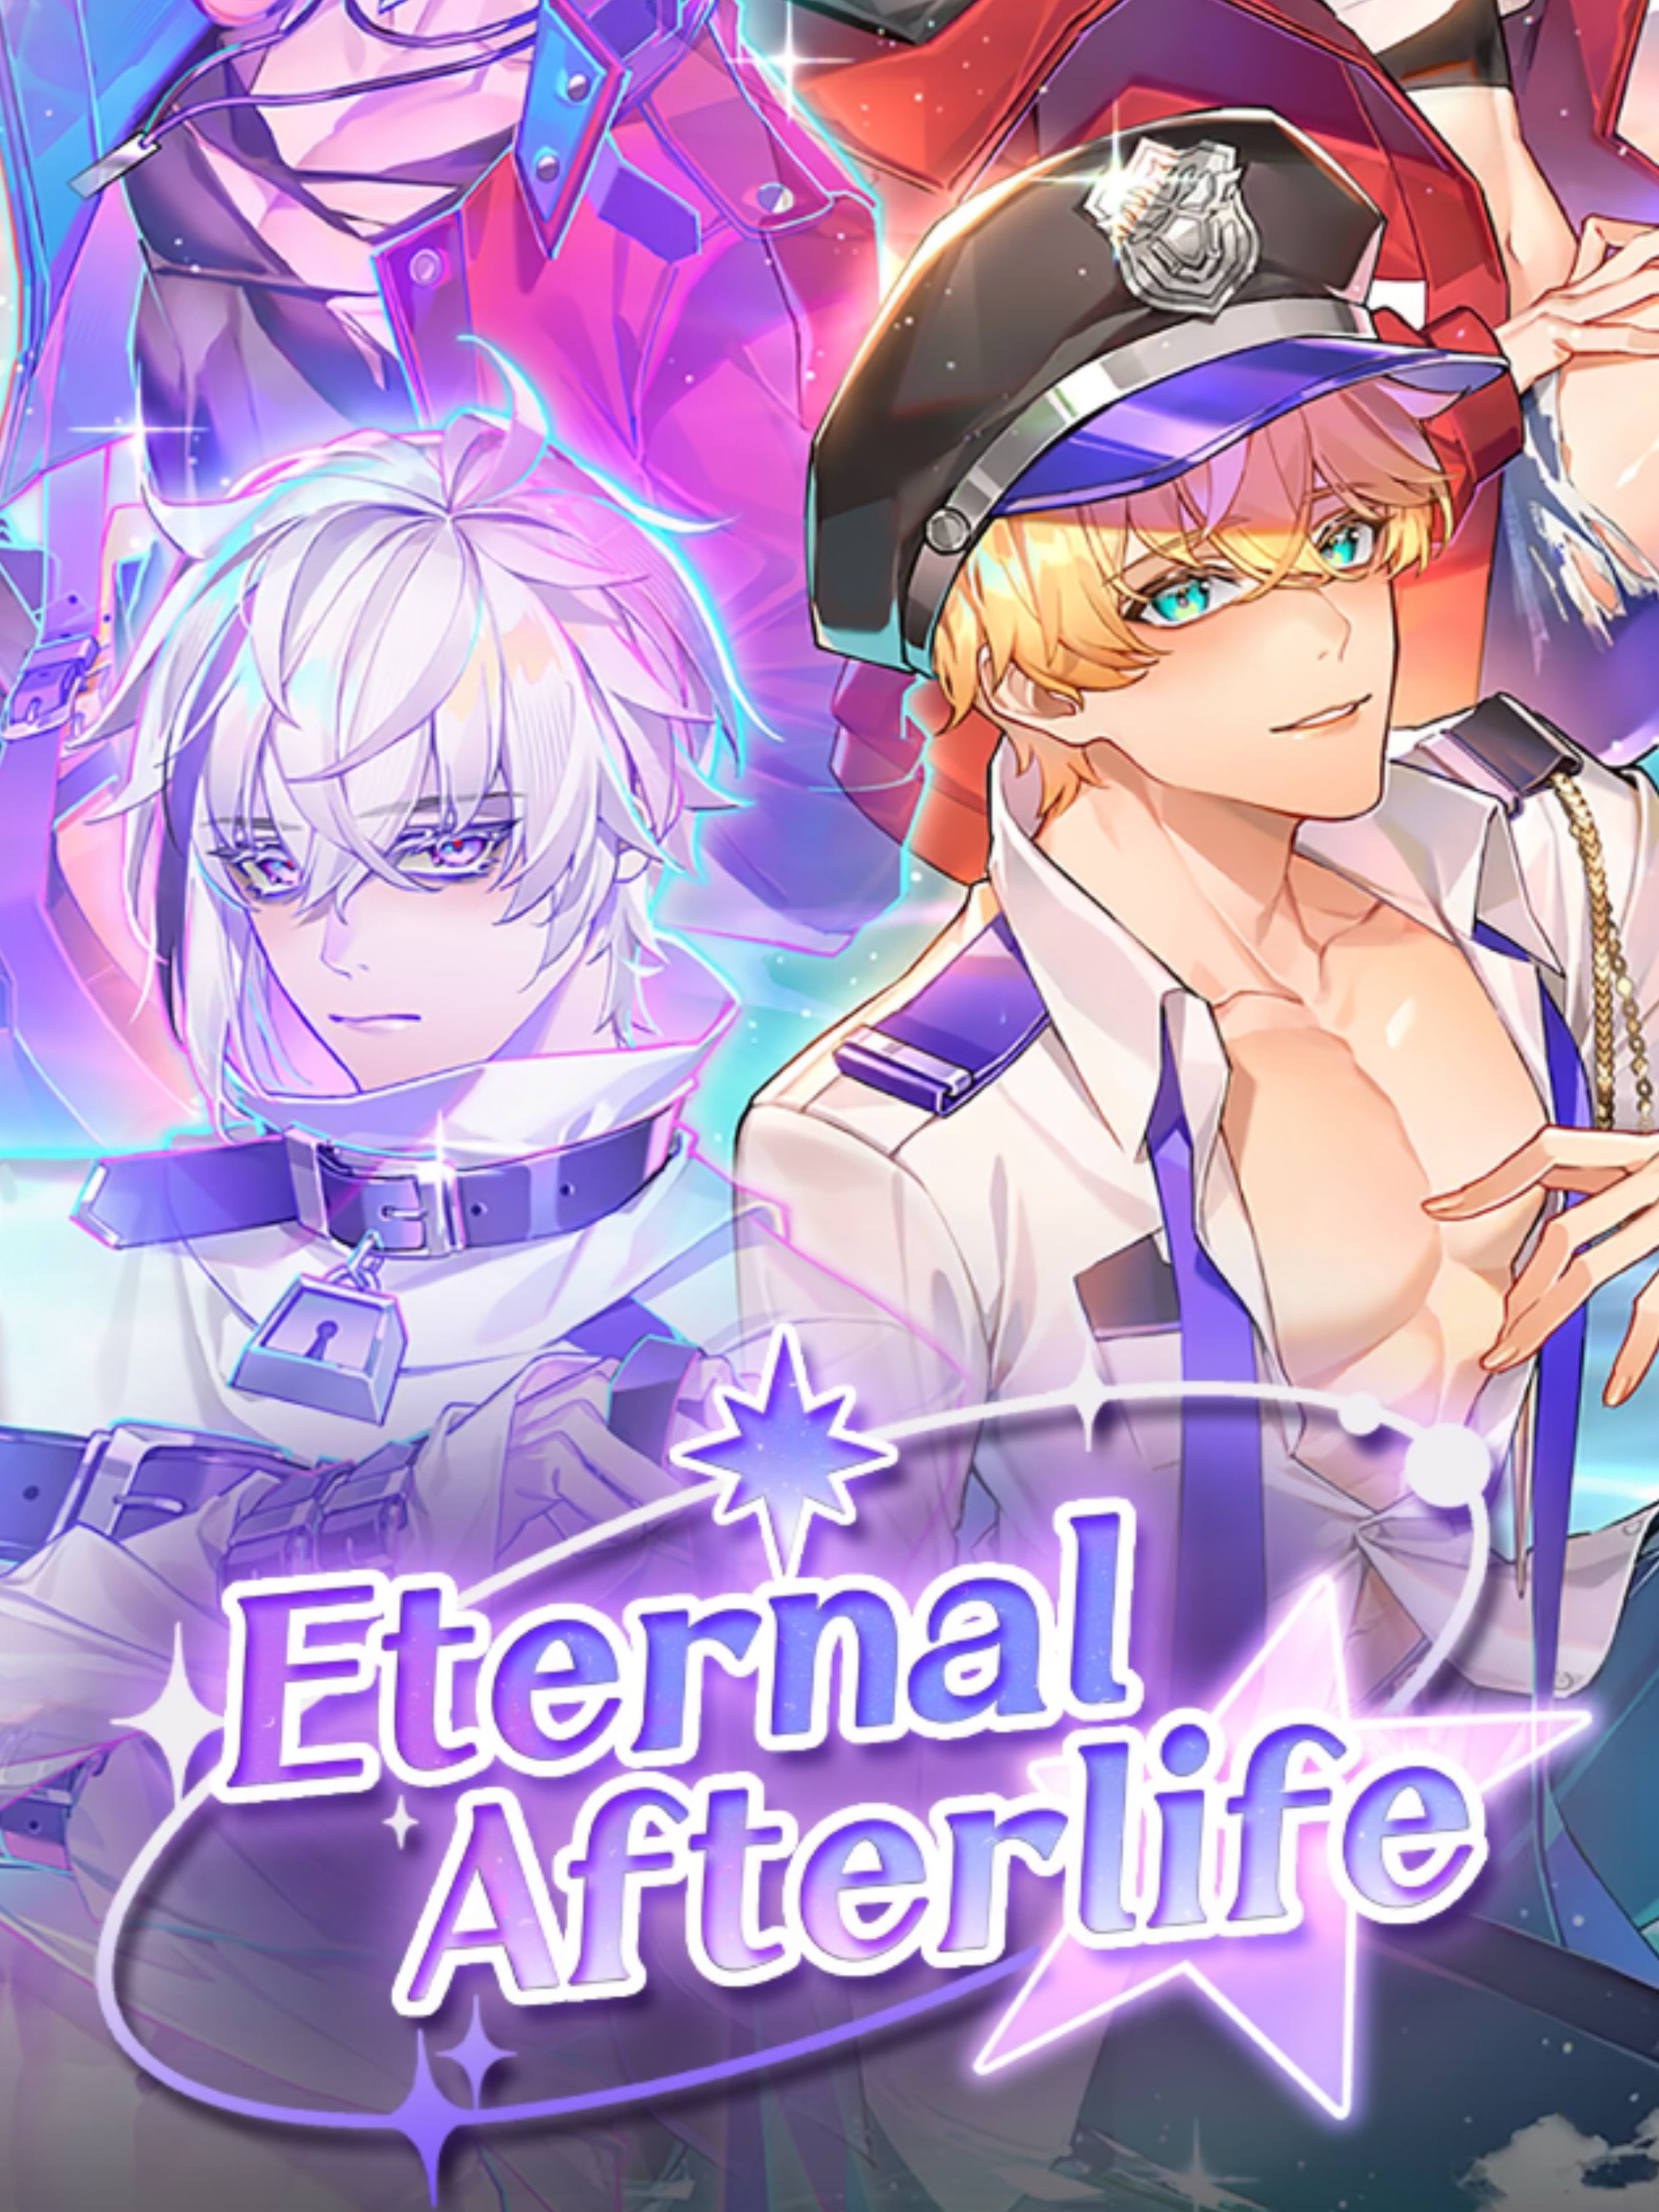 👻 Eternal Afterlife : otome love 👻 - YouTube